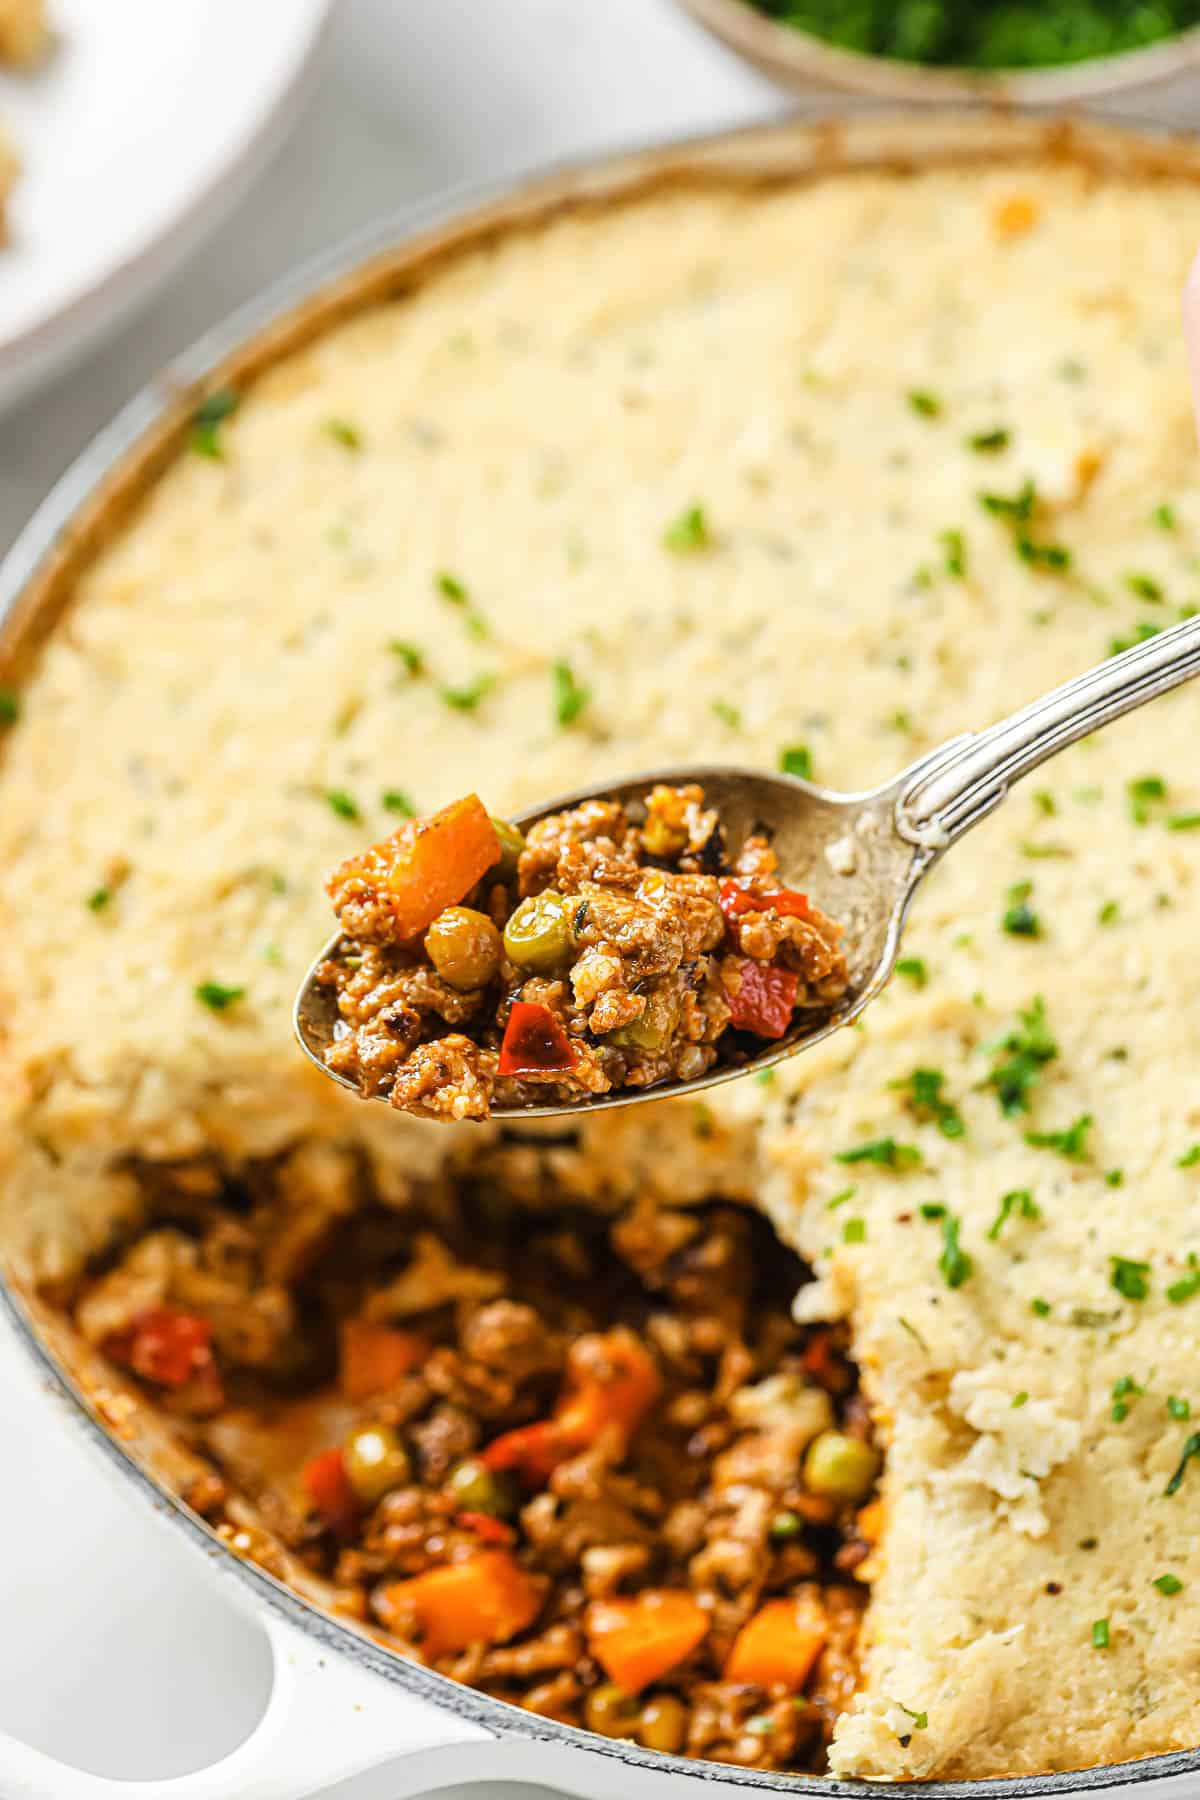 An enameled cast iron skillet full of shepherds pie, made with beef, veggies, tomato sauce, and topped with cauliflower mash.